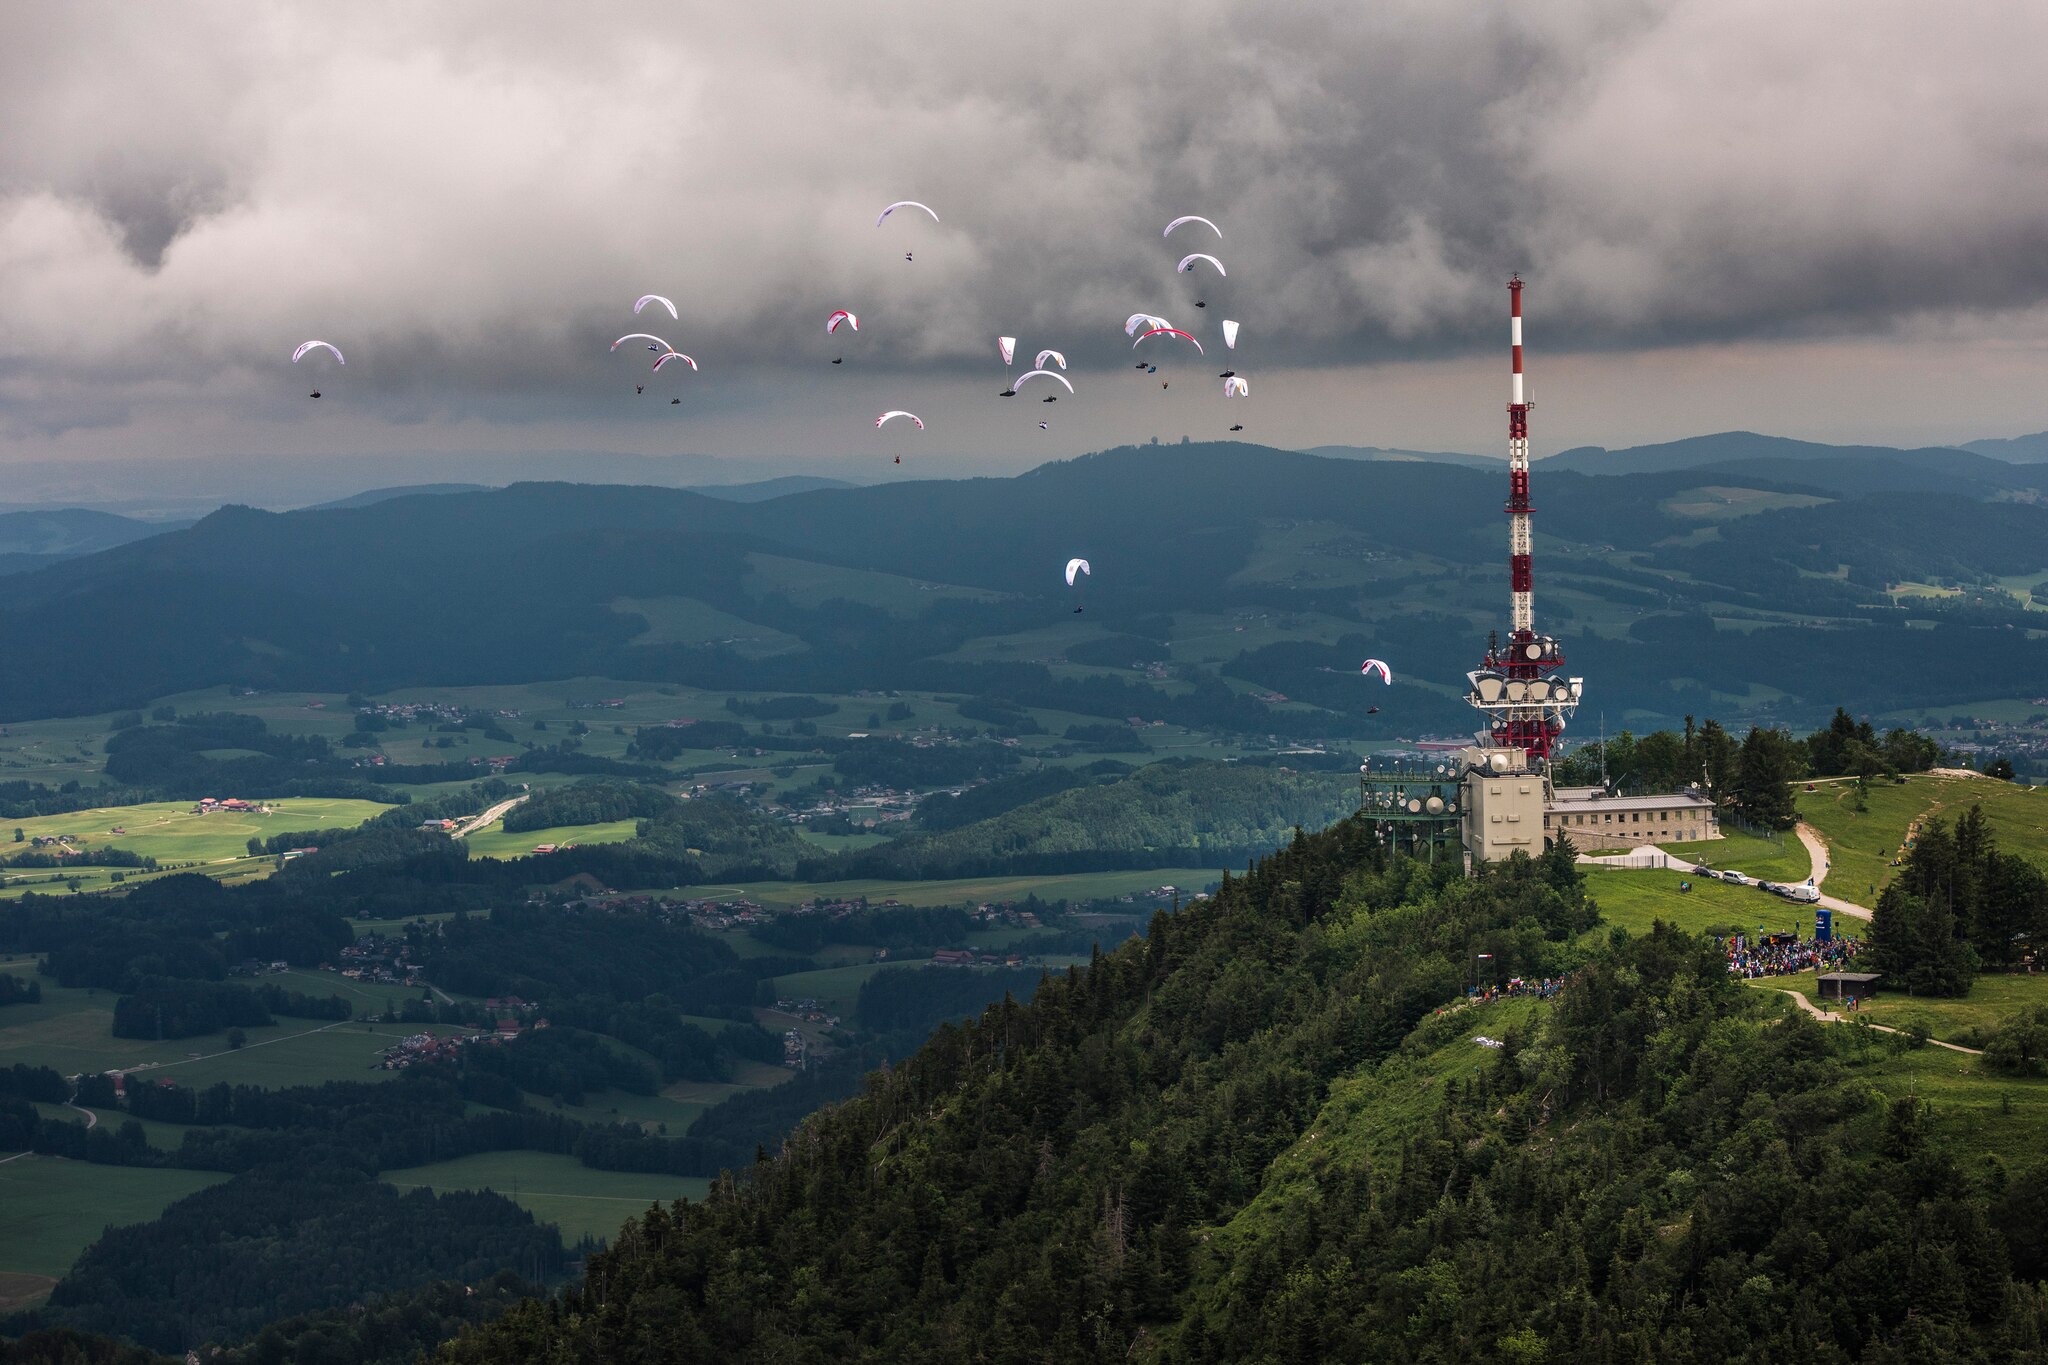 Competitors race during the Red Bull X-Alps at the Gaisberg in Salzburg, Austria on June 16, 2019.